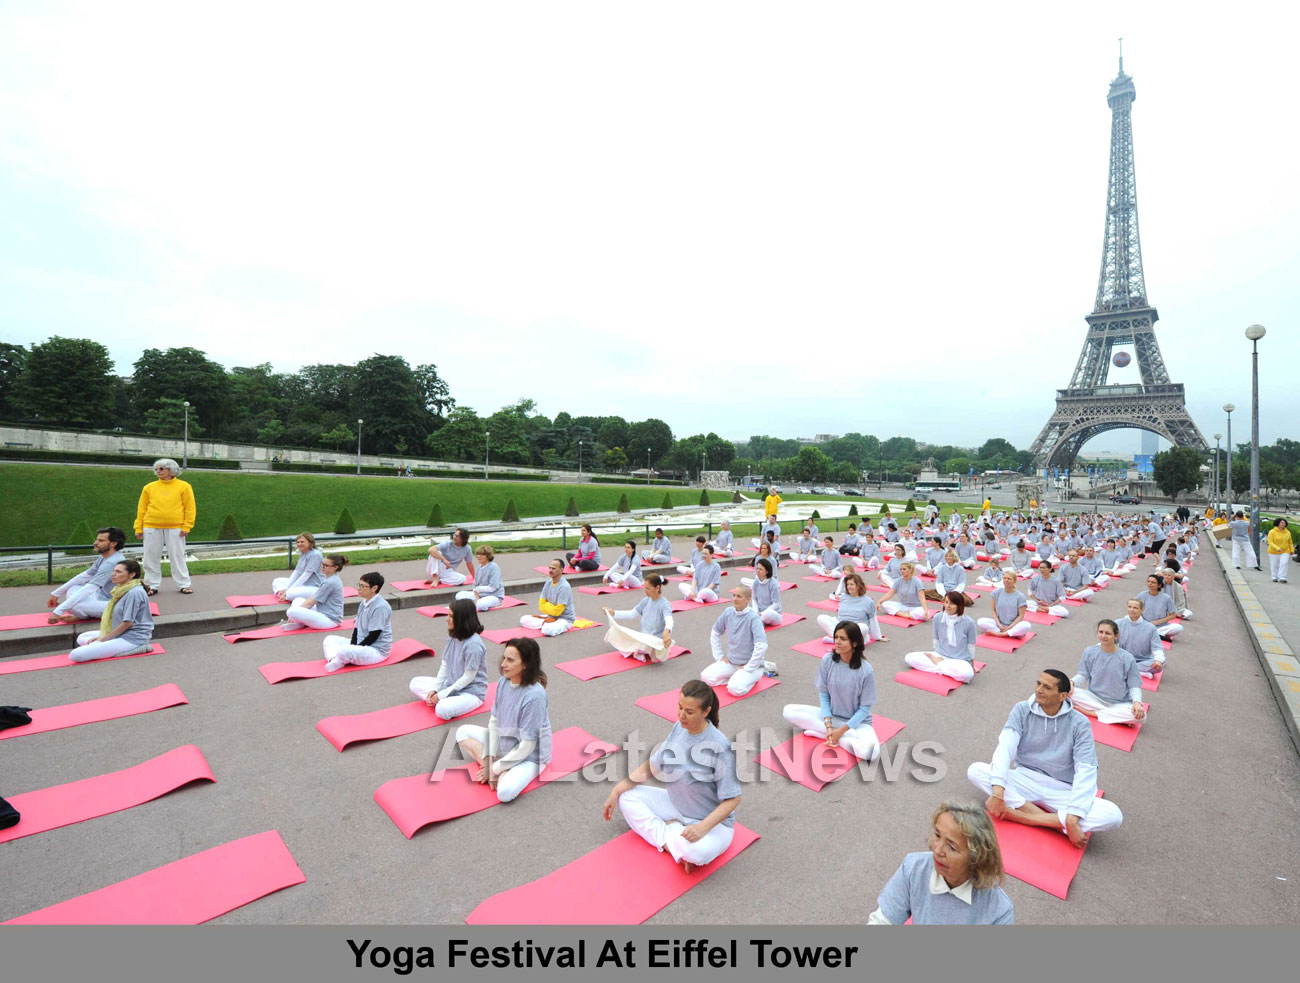 Euro Cup and Yoga Festival at Eiffel Tower Rocked Paris - Picture 3